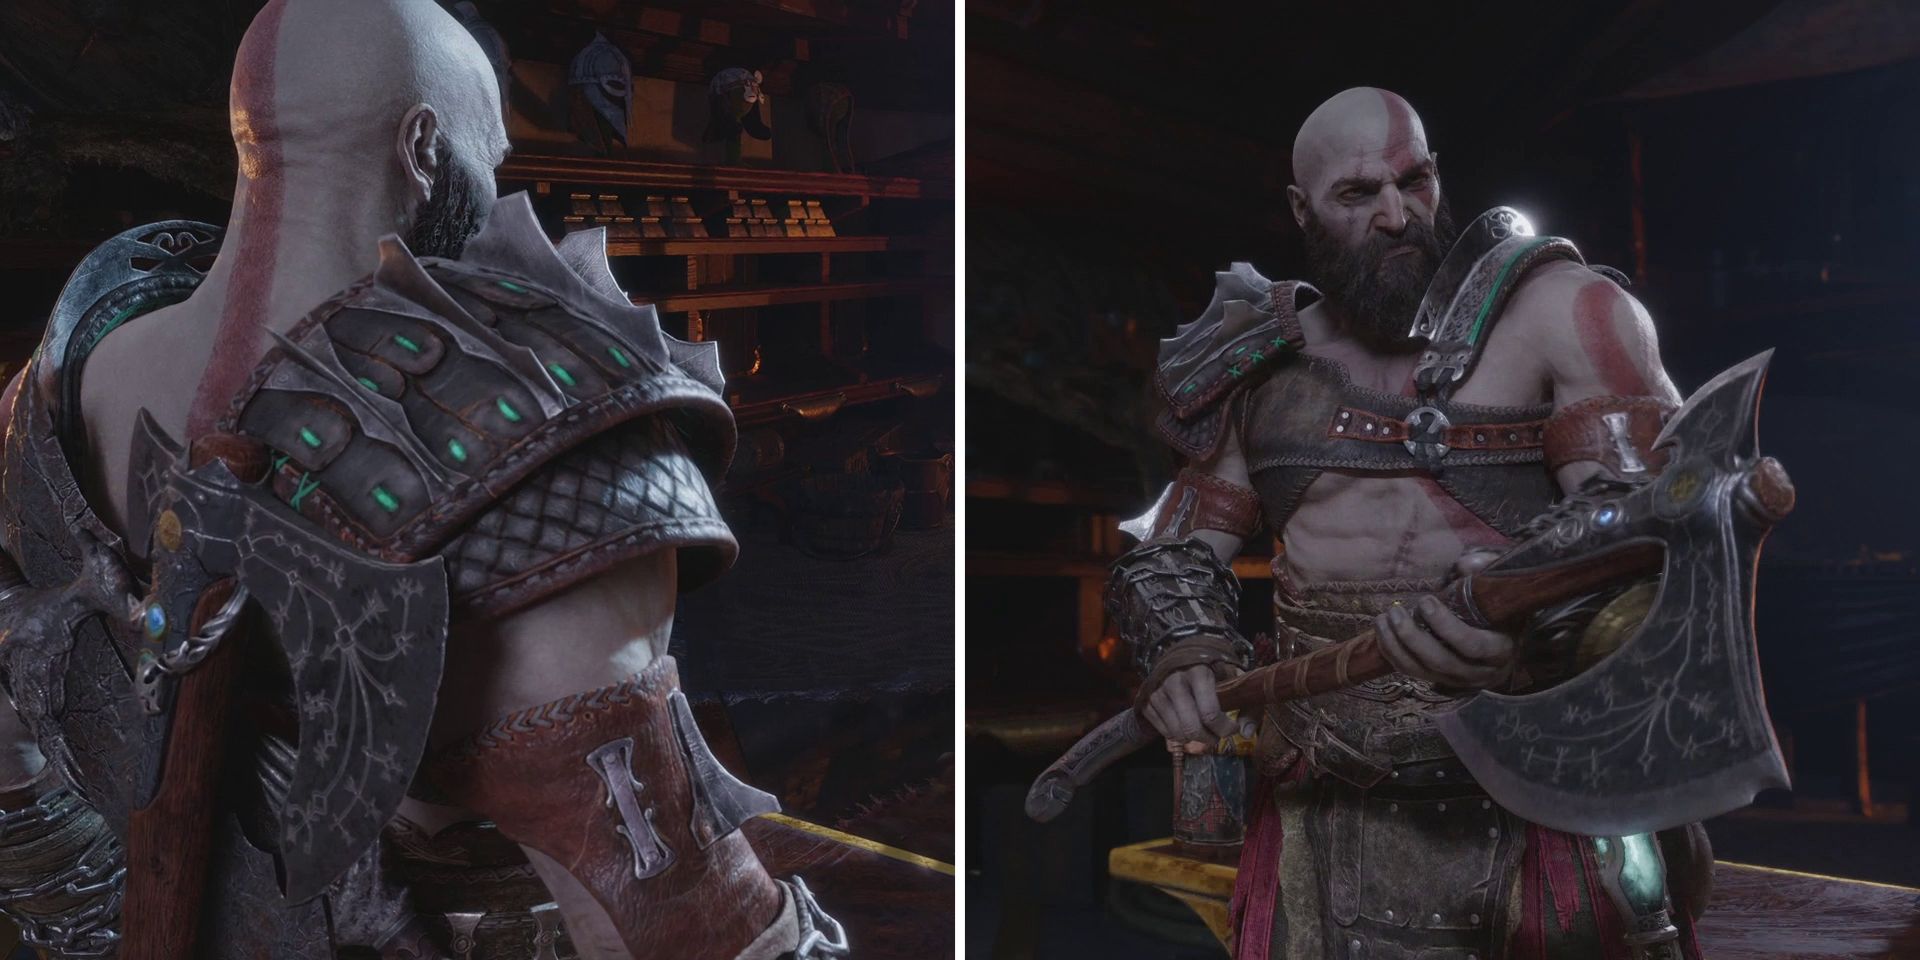 God of War Ragnarok Can the Leviathan axe and Mjolnir clash in game? 